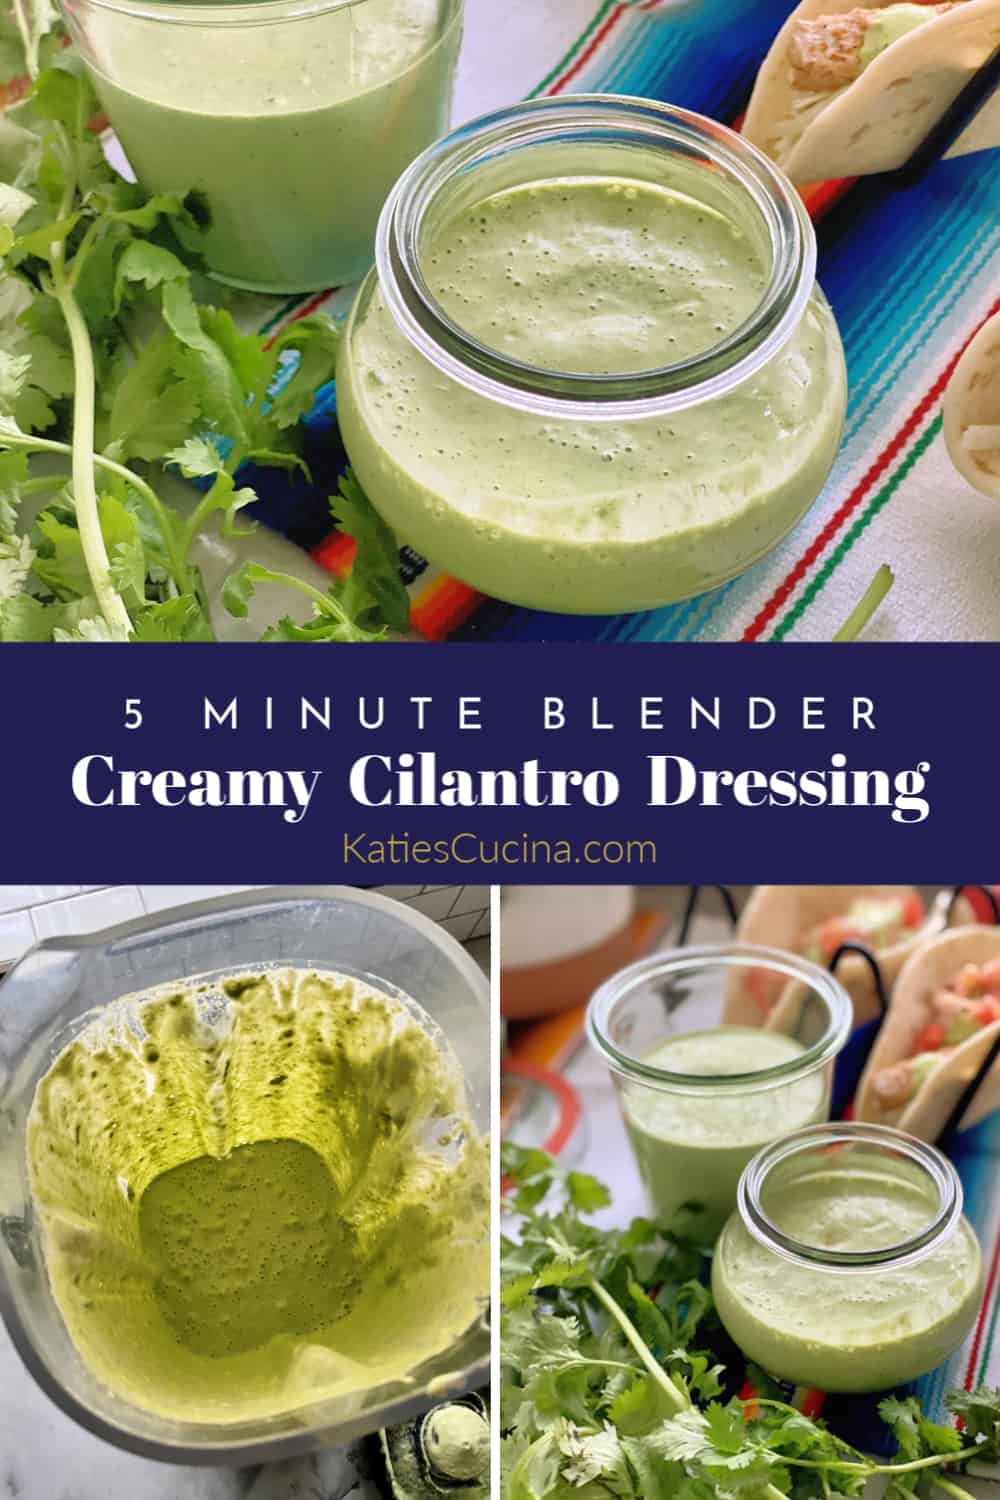 Blender Creamy Cilantro Dressing photo collage with text